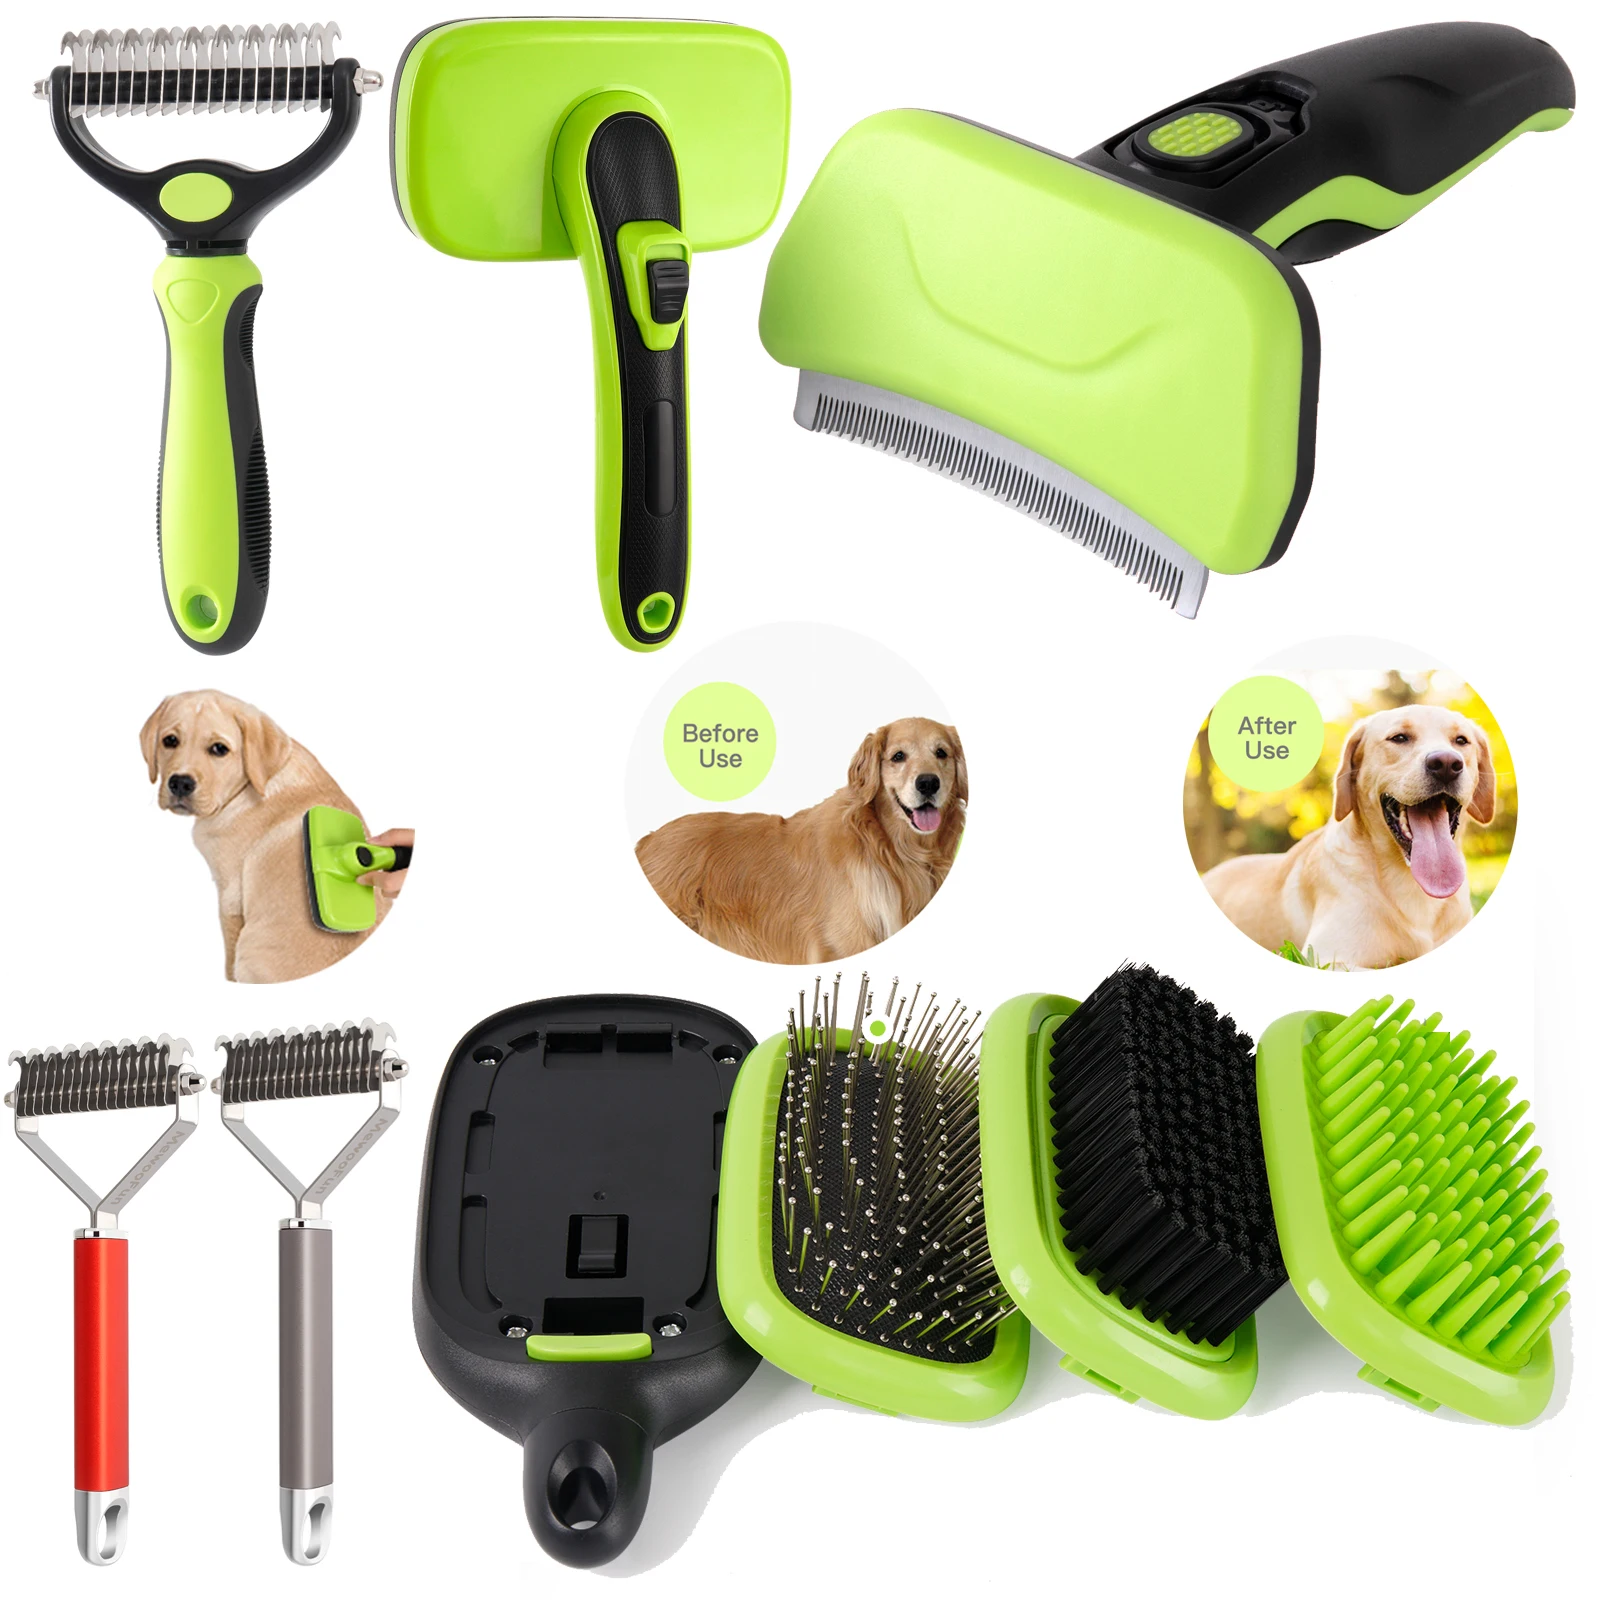 Mewoofun Hair Removal Comb for Dogs Dematting Deshedding Brush Grooming Tool For Matted Long Hair Curly